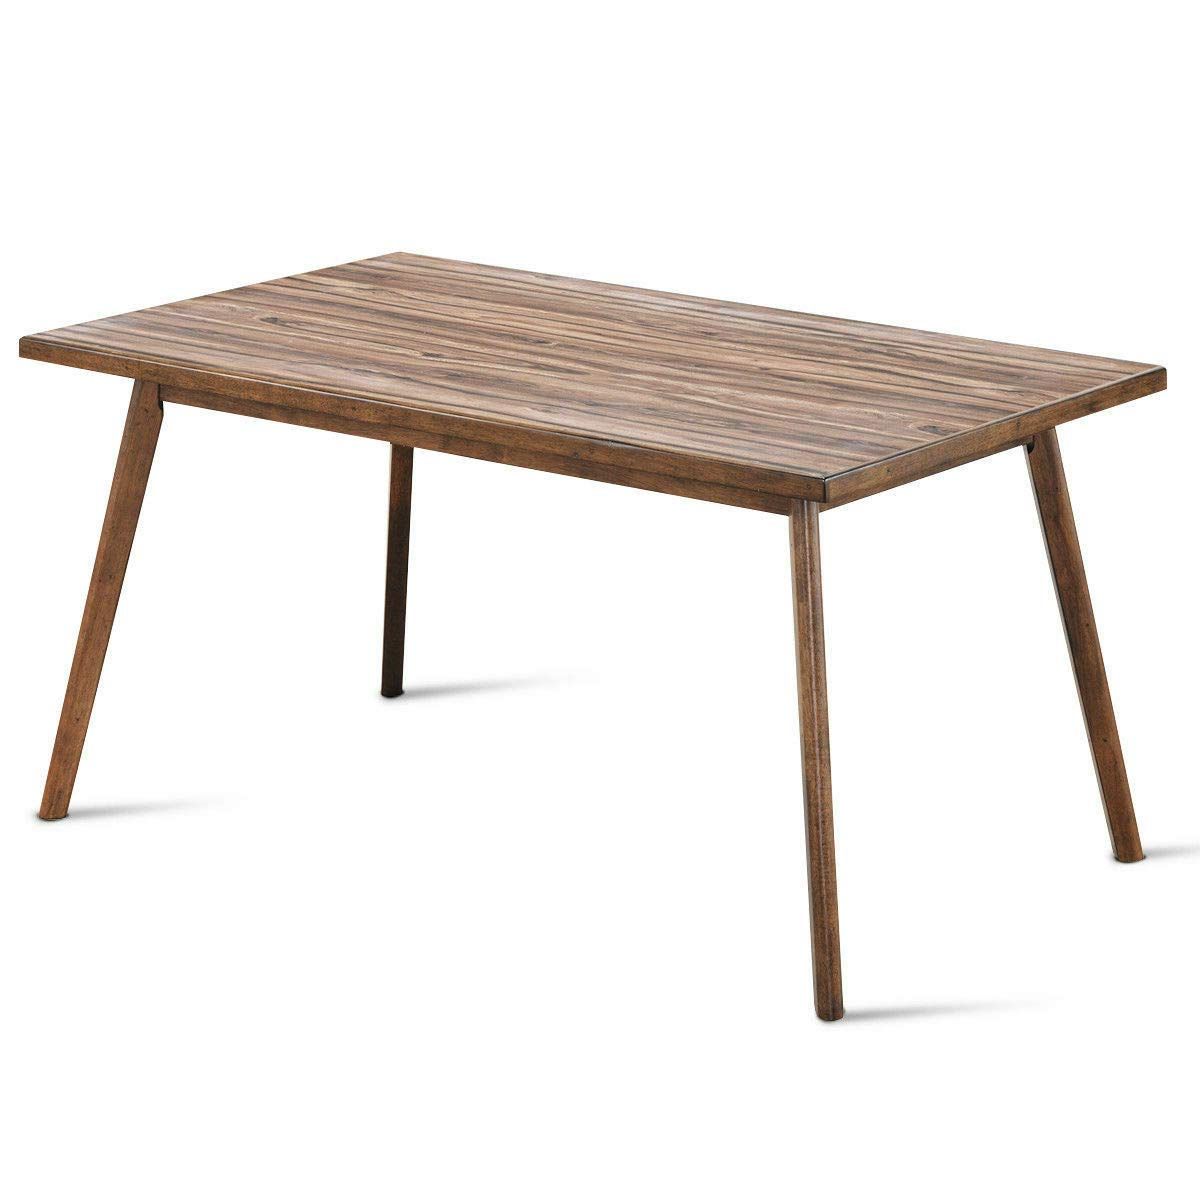 Mid Century Rectangular Top Dining Tables With Wood Legs Throughout Popular Amazon – Mid Century Dining Table Rectangular Top Wood (View 1 of 30)